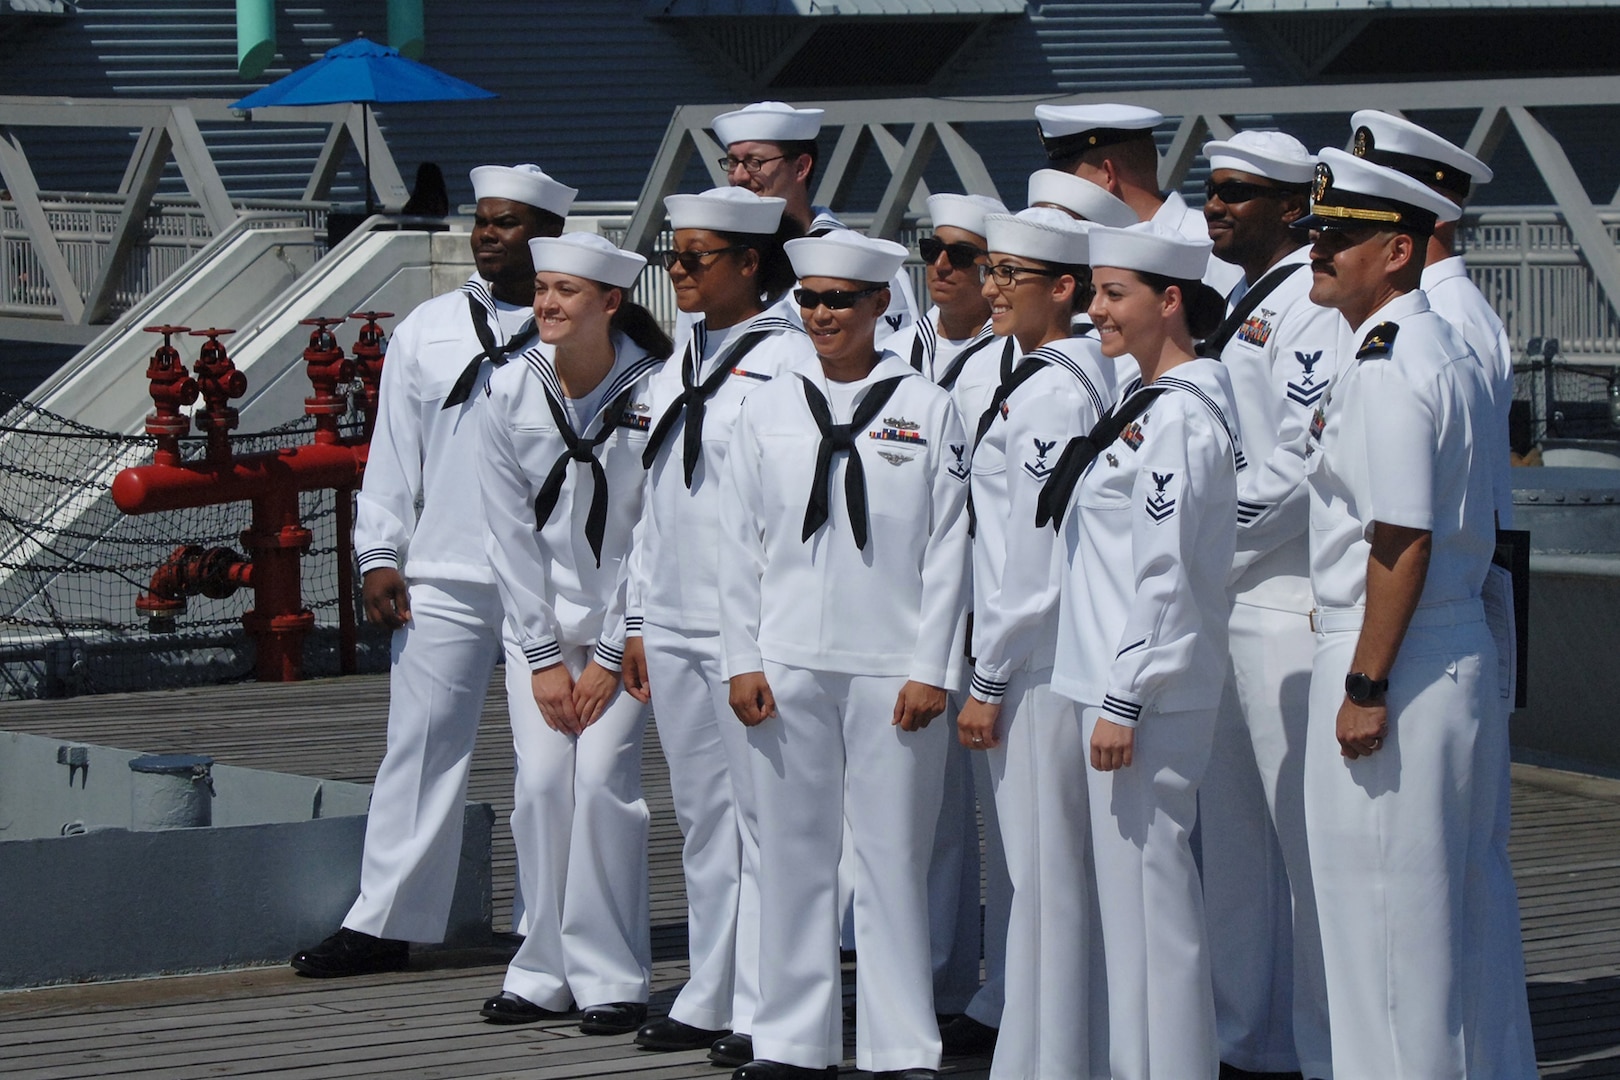 Sailors pose for a group photo.